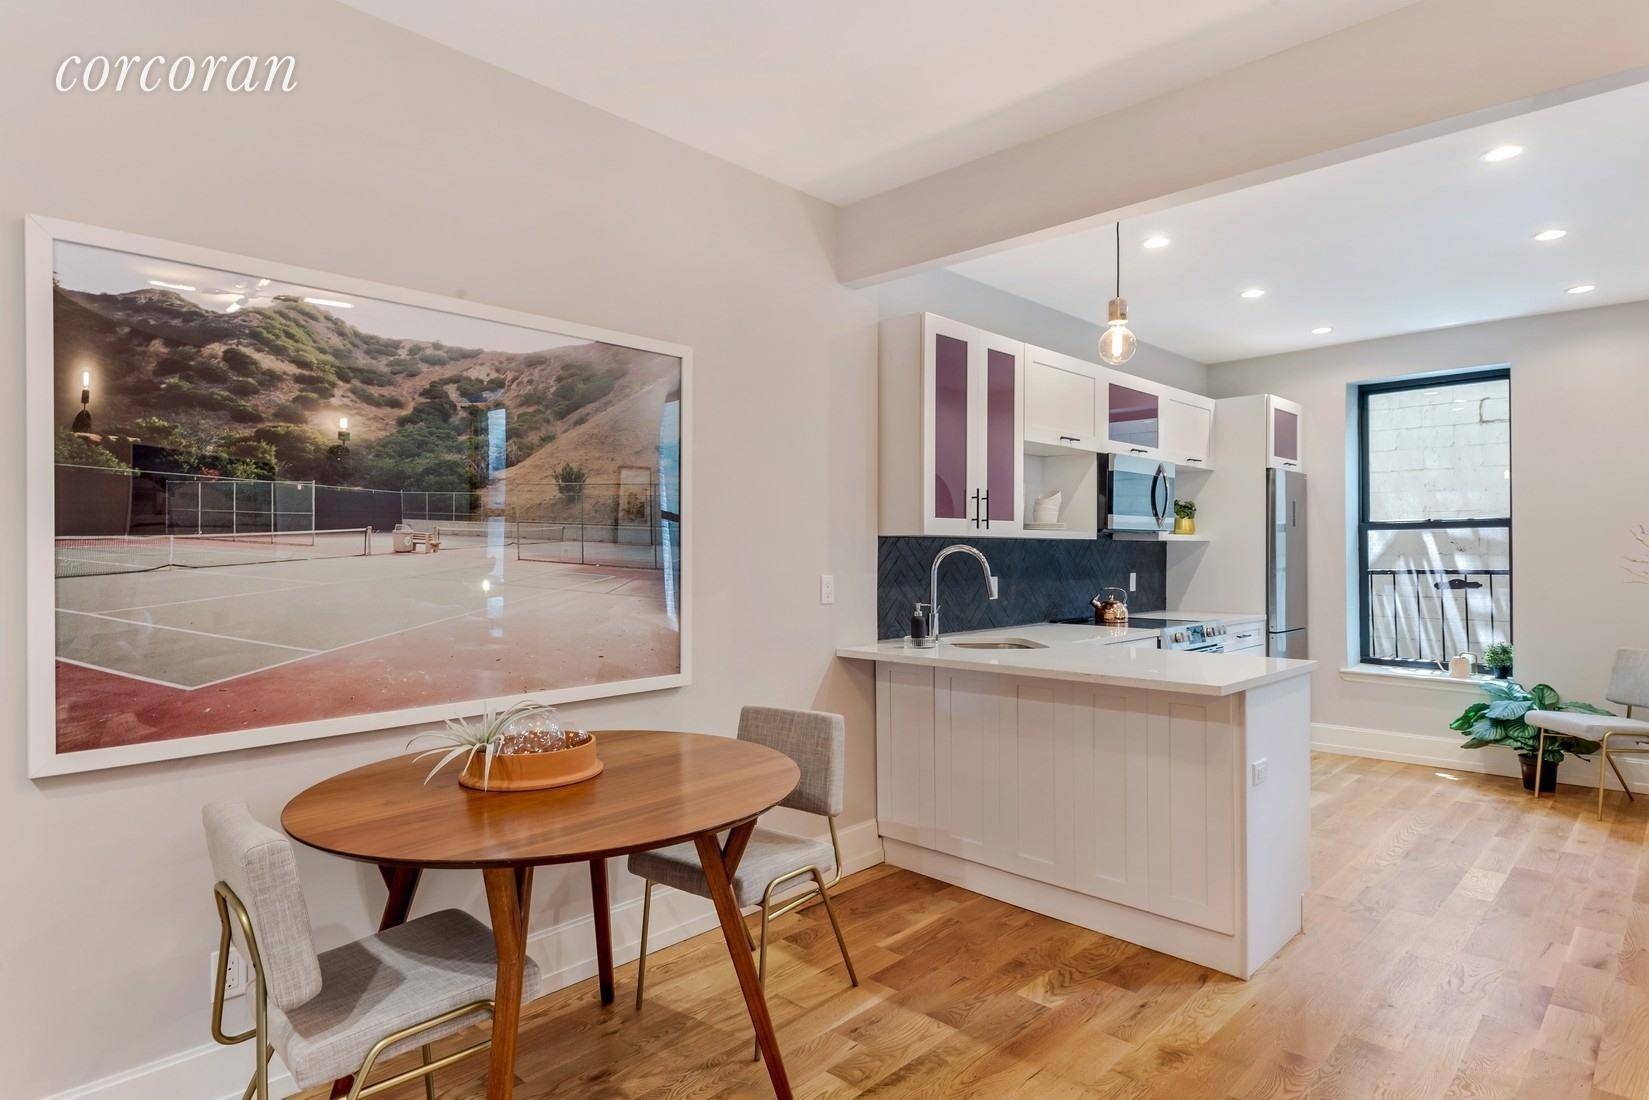 Run, dont walk, to this newly renovated resale in a pre war 8 unit condo building in the best location in exciting Crown Heights.